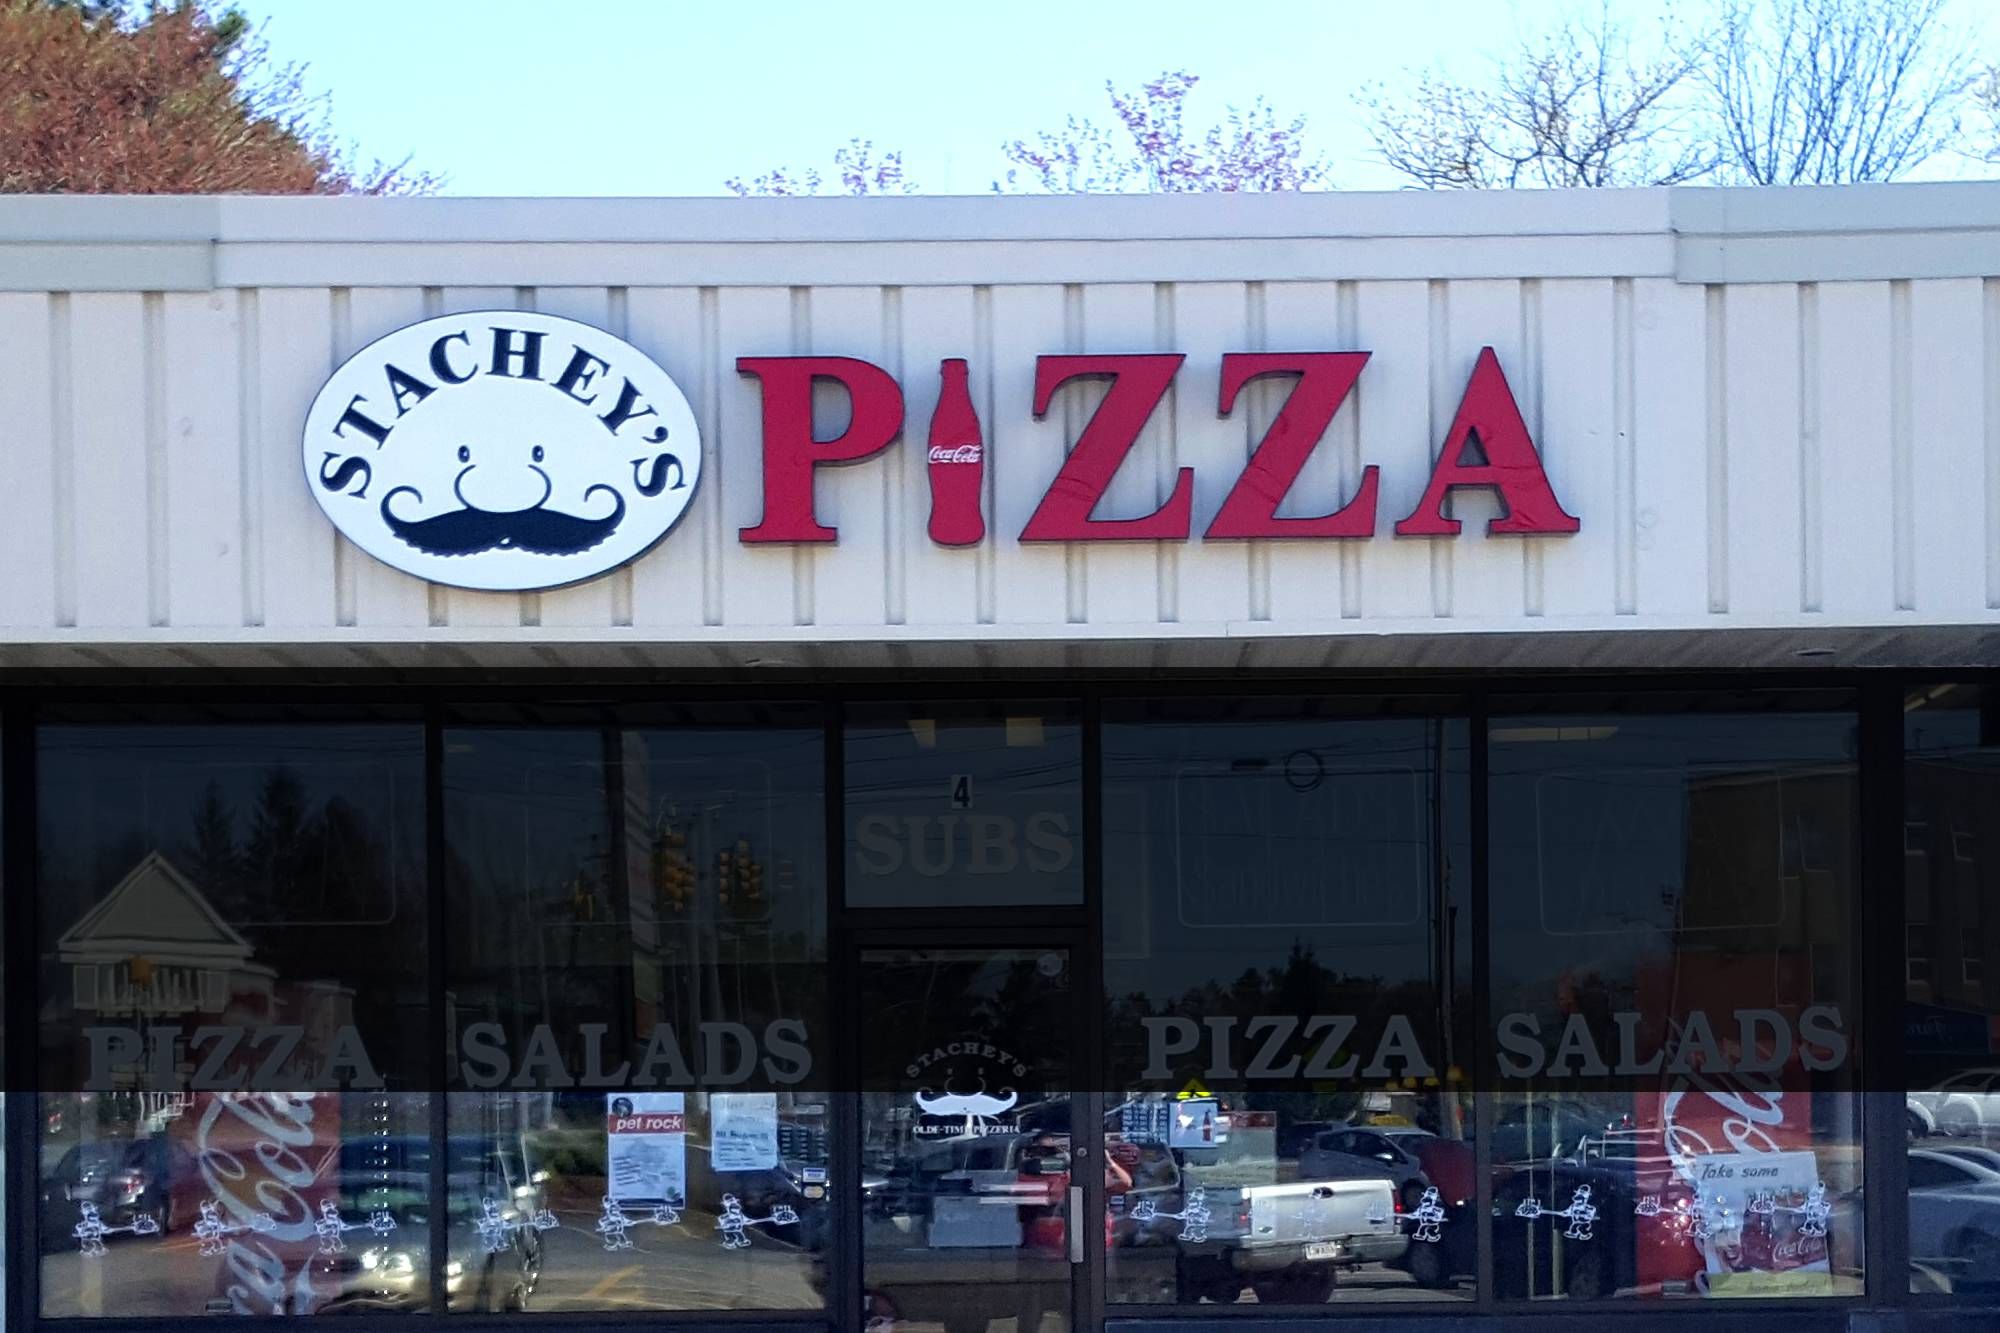 Stachey's Pizza - Our Salem New Hampshire location